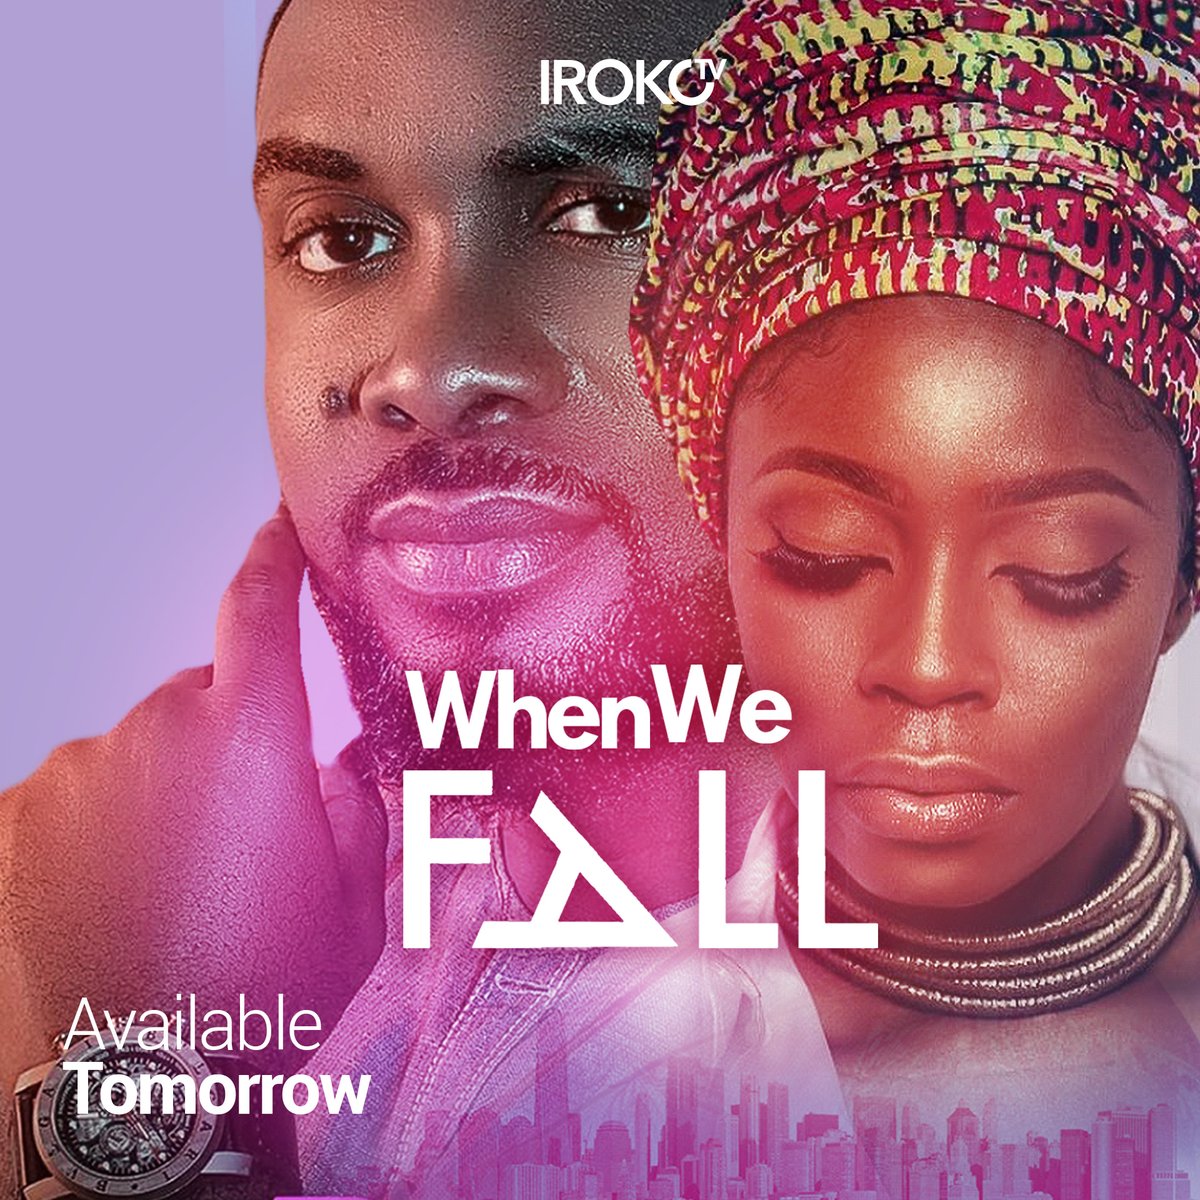 Get ready to get on an emotional roller coaster with @BolajiOgunmola and @uzorarukwe  

'WHEN WE FALL' will be available tomorrow on iROKOtv.
Subscribe>>>> ow.ly/yZBg50H5WeJ

#irokotv #NollywoodMovies #bestofirokotv #whenwefall